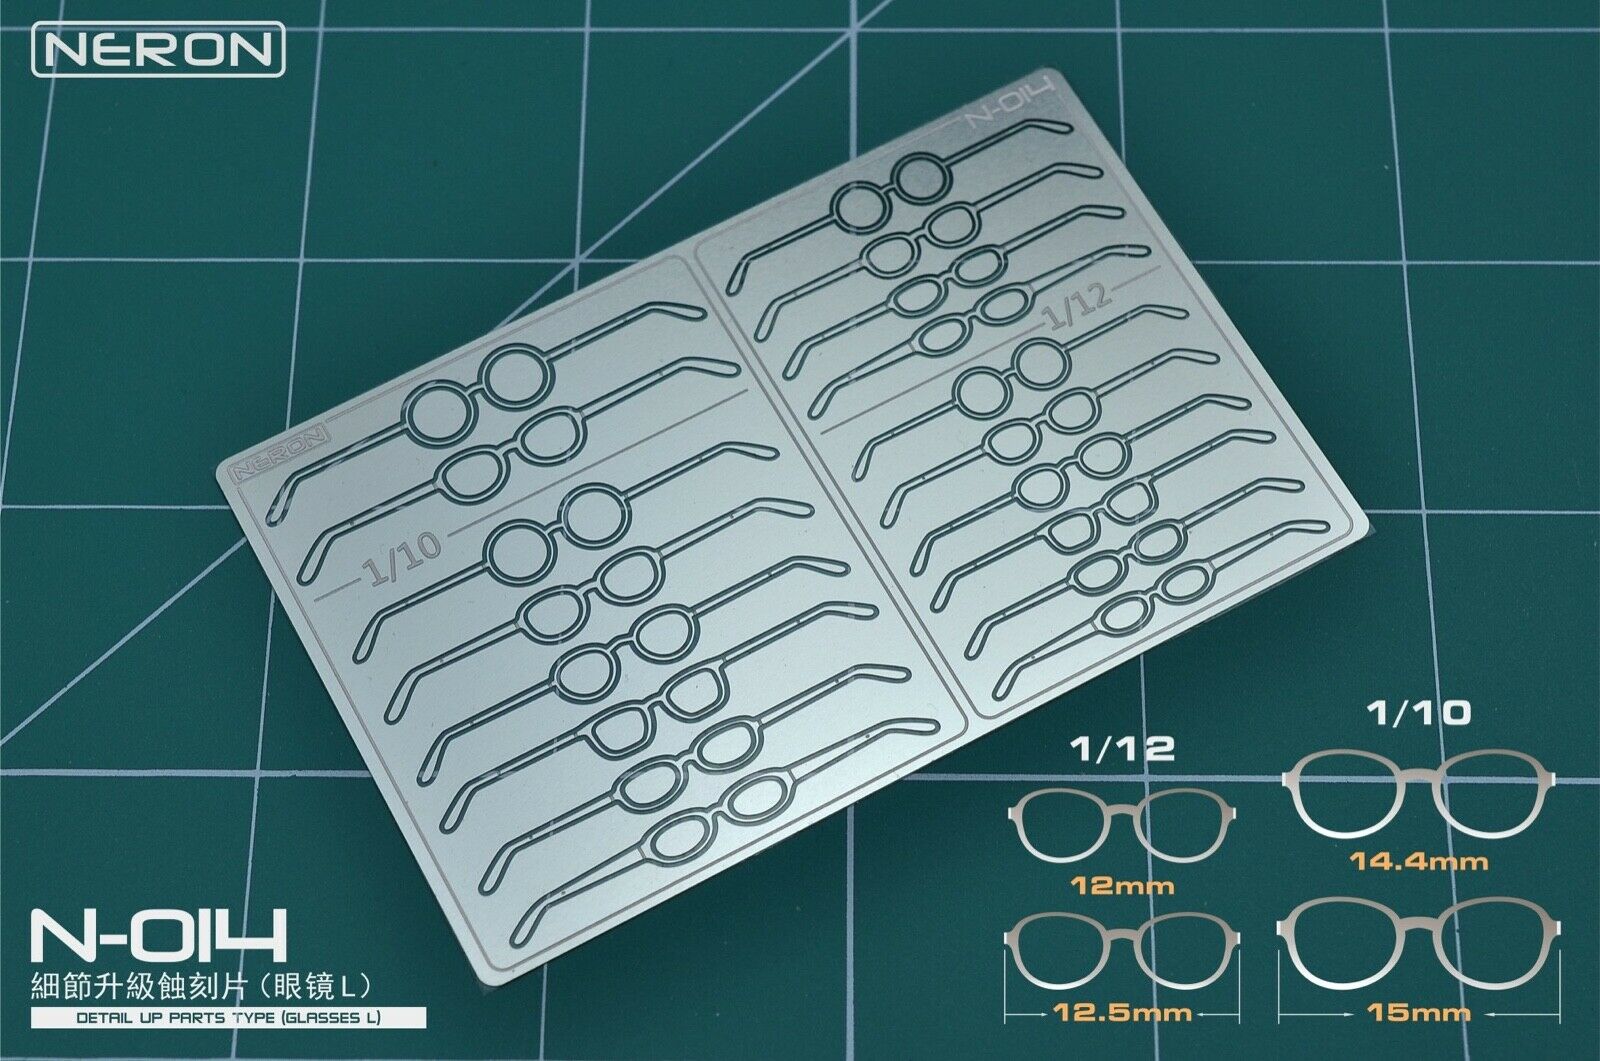 N-014: Neron Miniature 1/12 & 1/10 Metal Glasses For 6" ~ 8" Action Figures